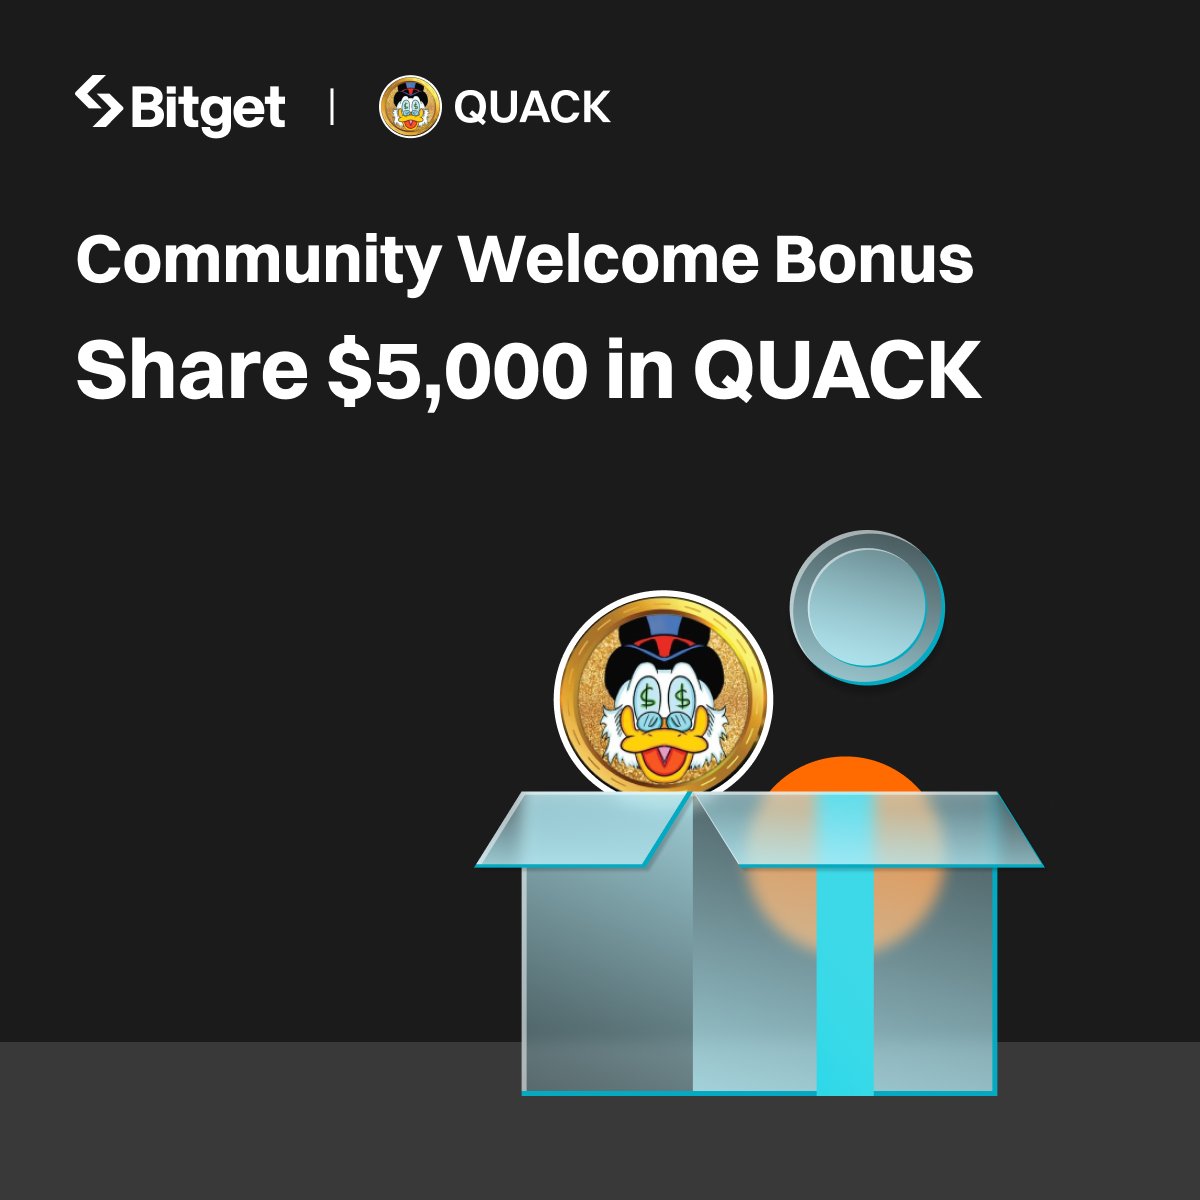 ✨ Join #Bitget x @richquack now to earn your special $5,000 worth of $QUACK! 📆 Apr 11, 8:00 - Apr 14, 8:00 (UTC) Start here👇 bitget.com/support/articl…